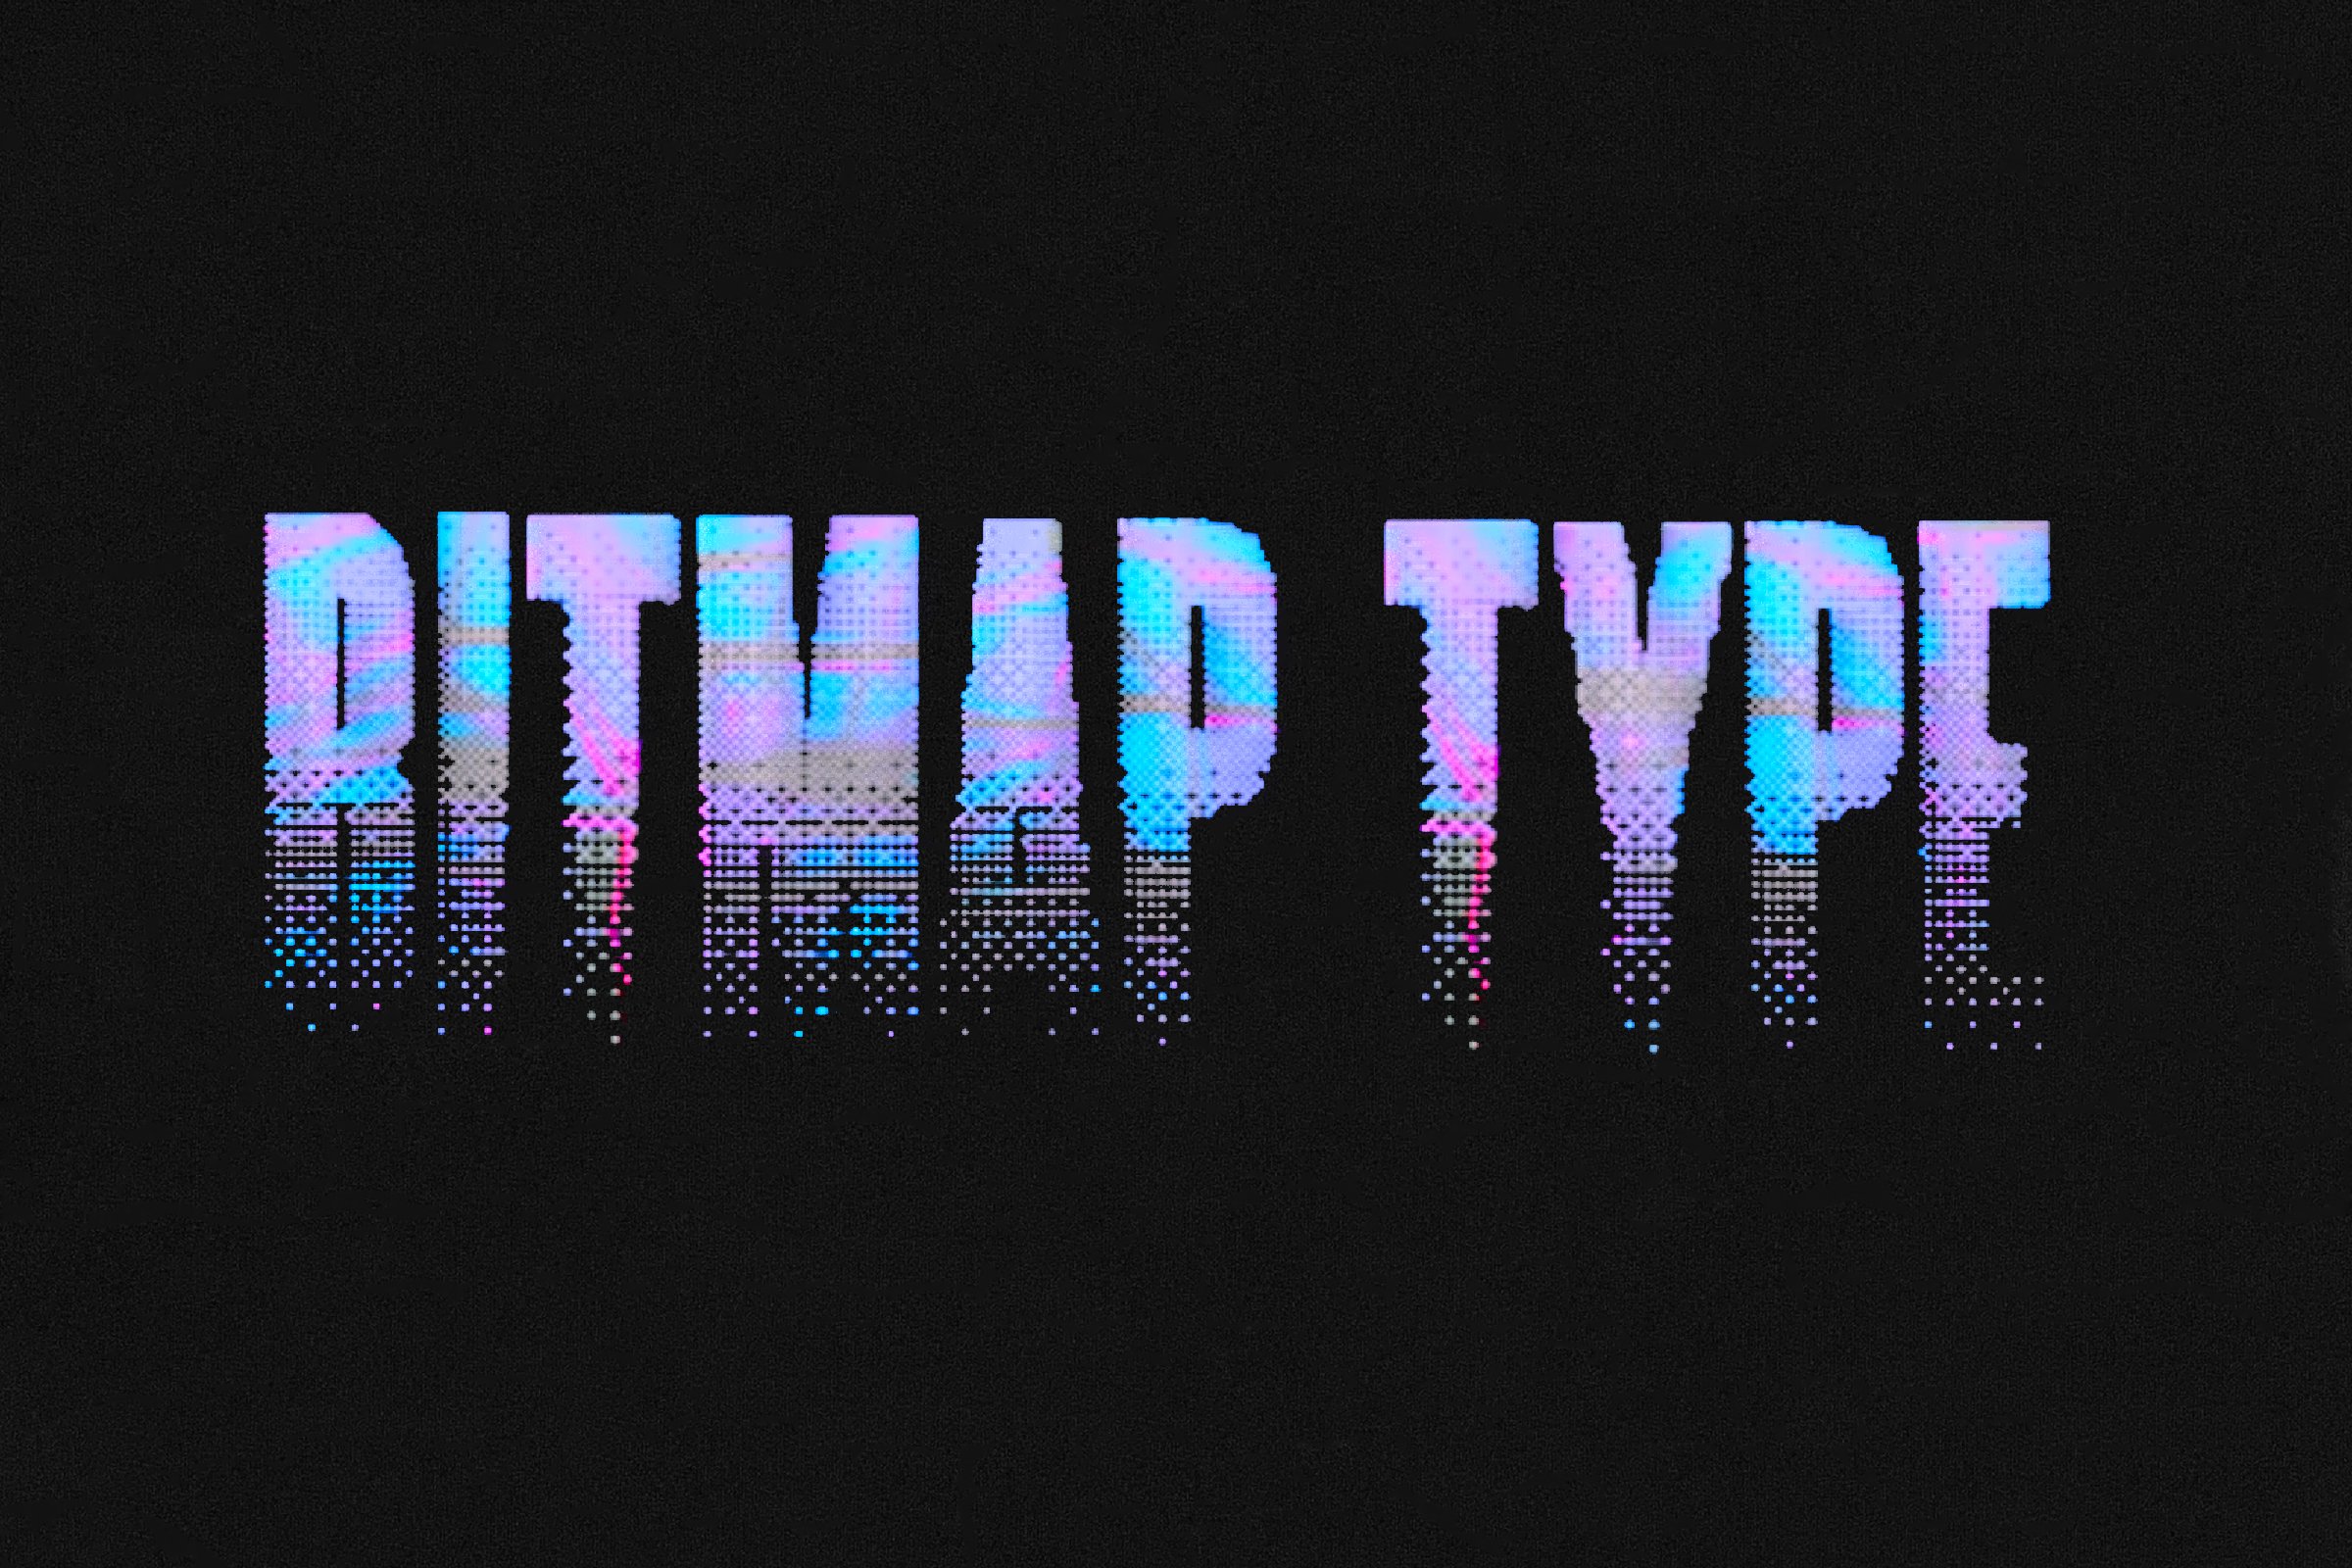 BITMAP TYPE - RETRO VHS TYPEFACE cover image.